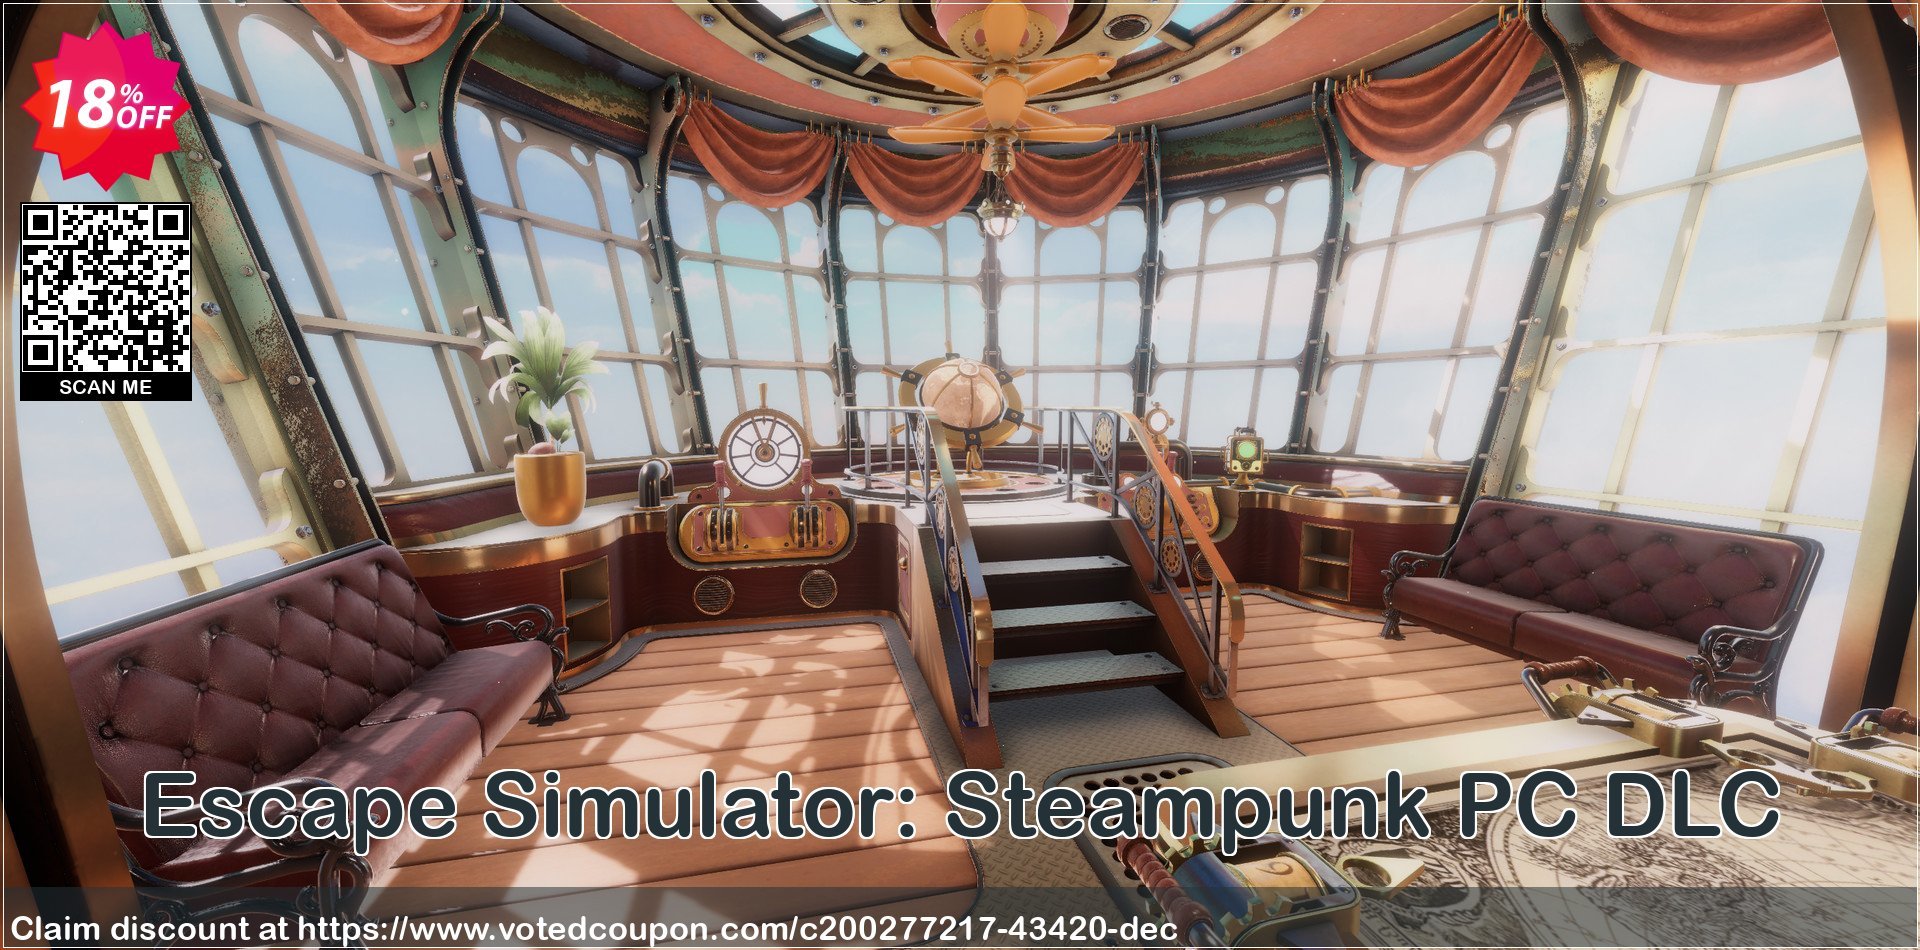 Escape Simulator: Steampunk PC DLC Coupon Code May 2024, 18% OFF - VotedCoupon